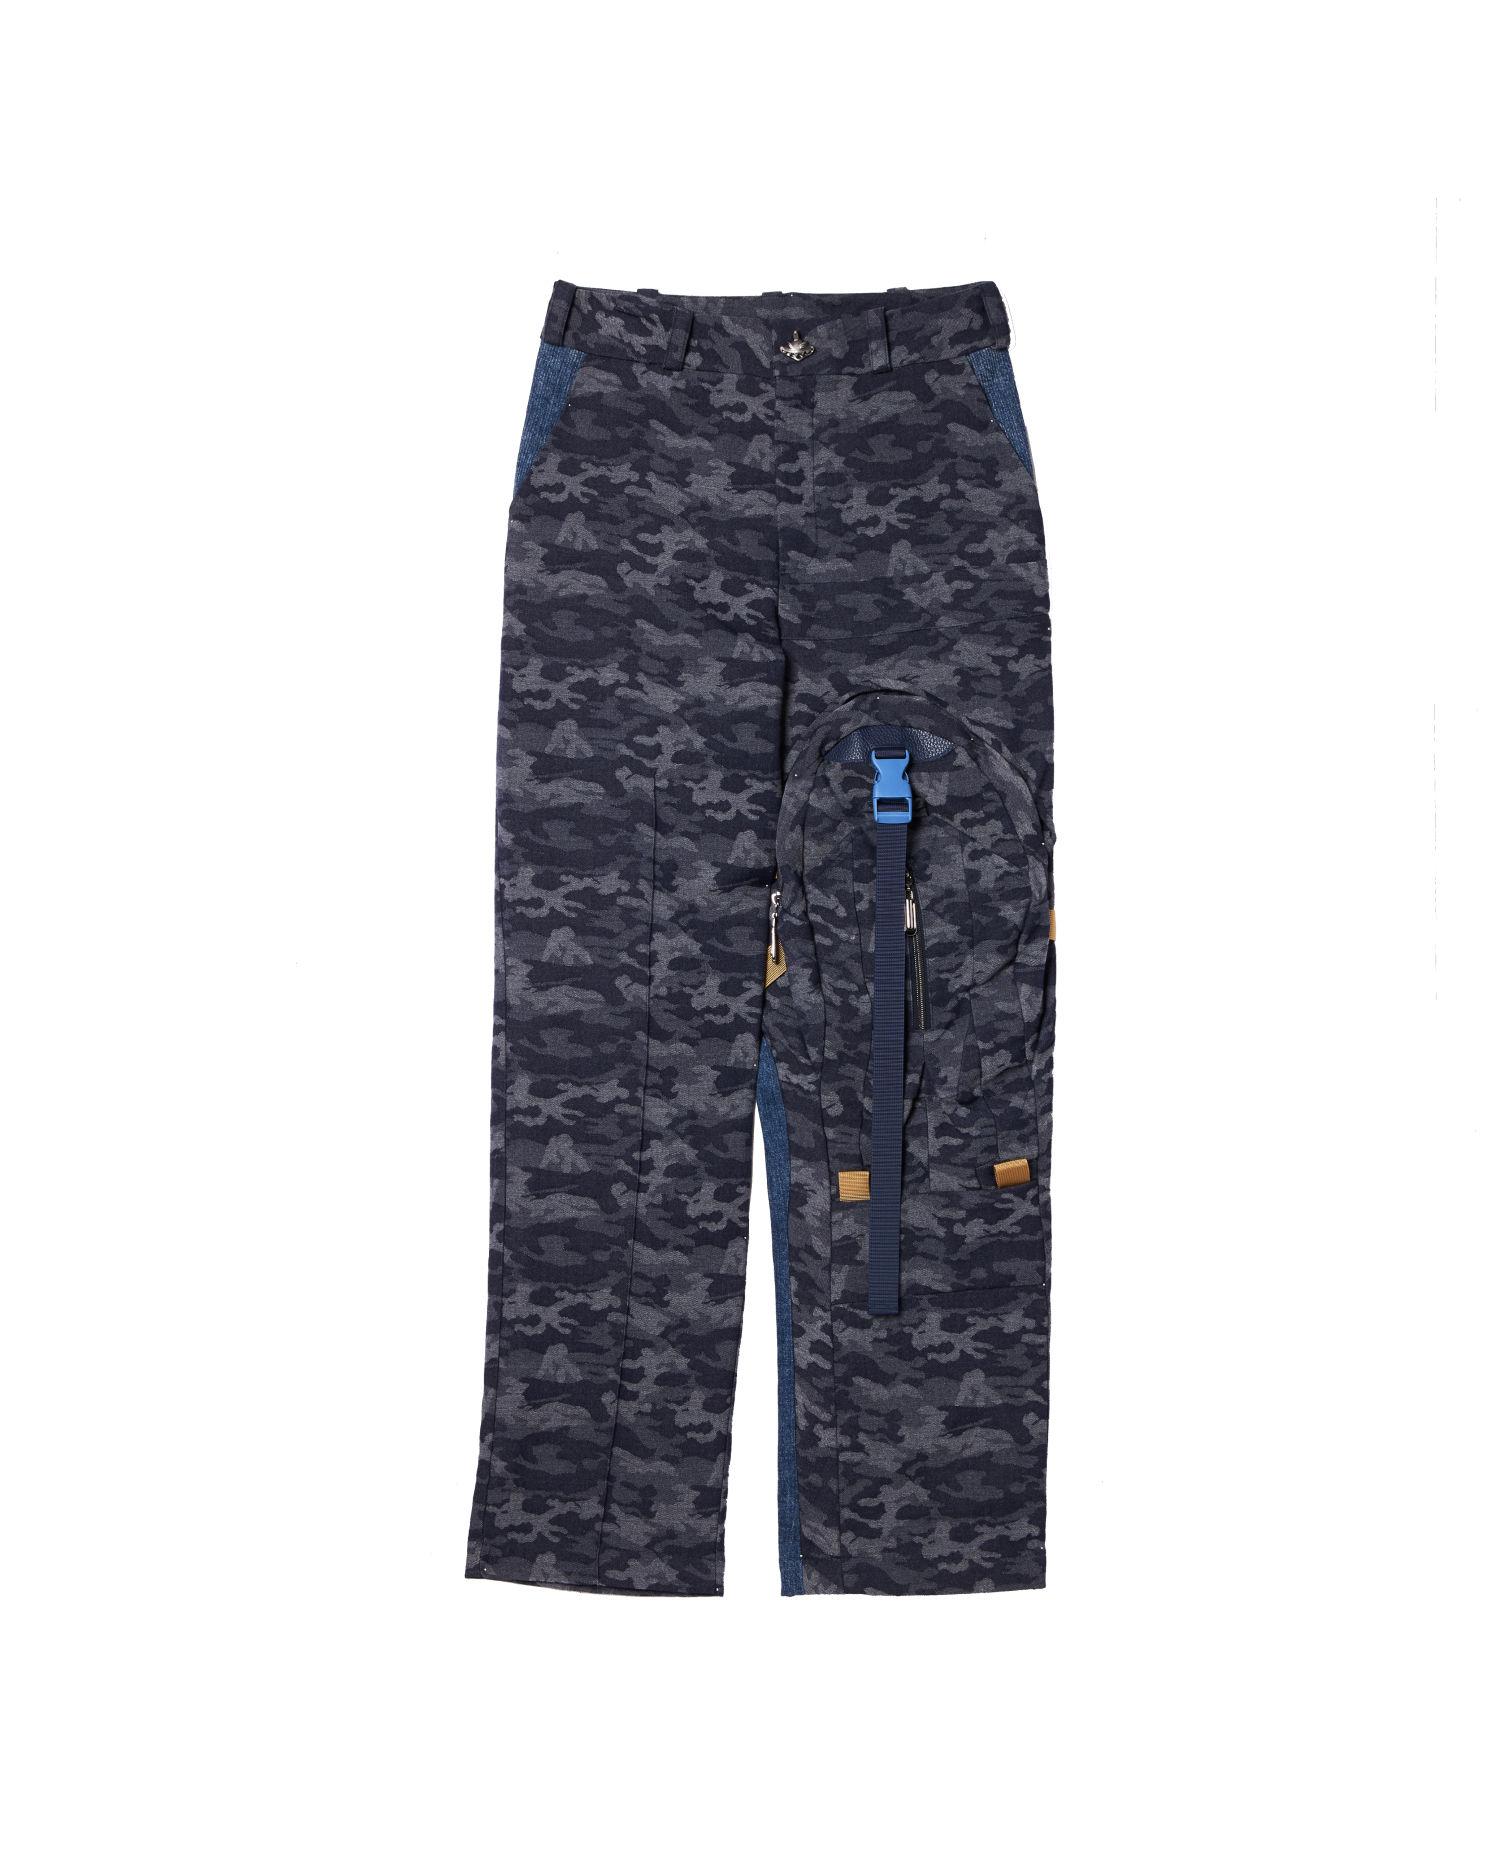 Camo single baggage trousers by CHRISTIAN STONE